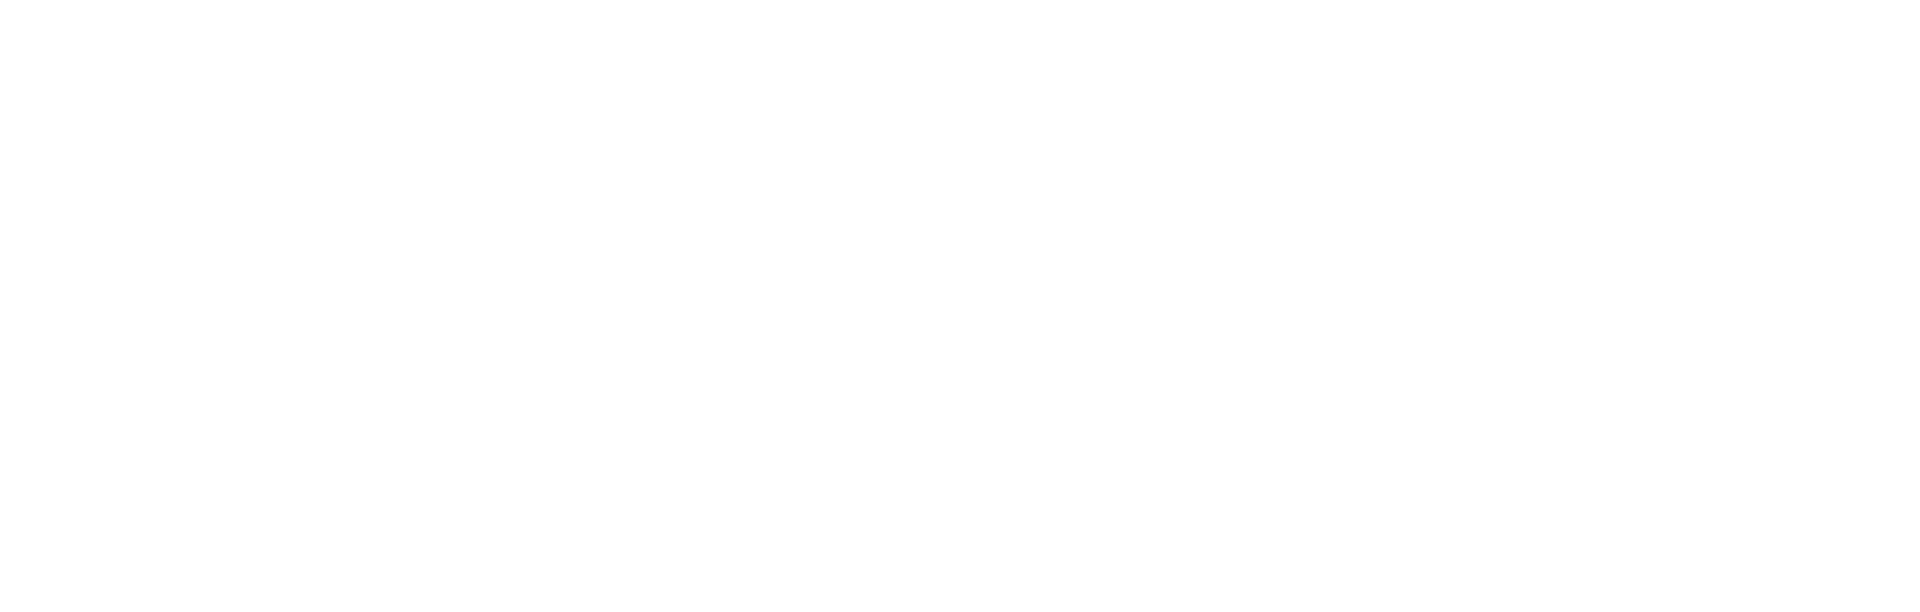 Welcome to First Century Foundations